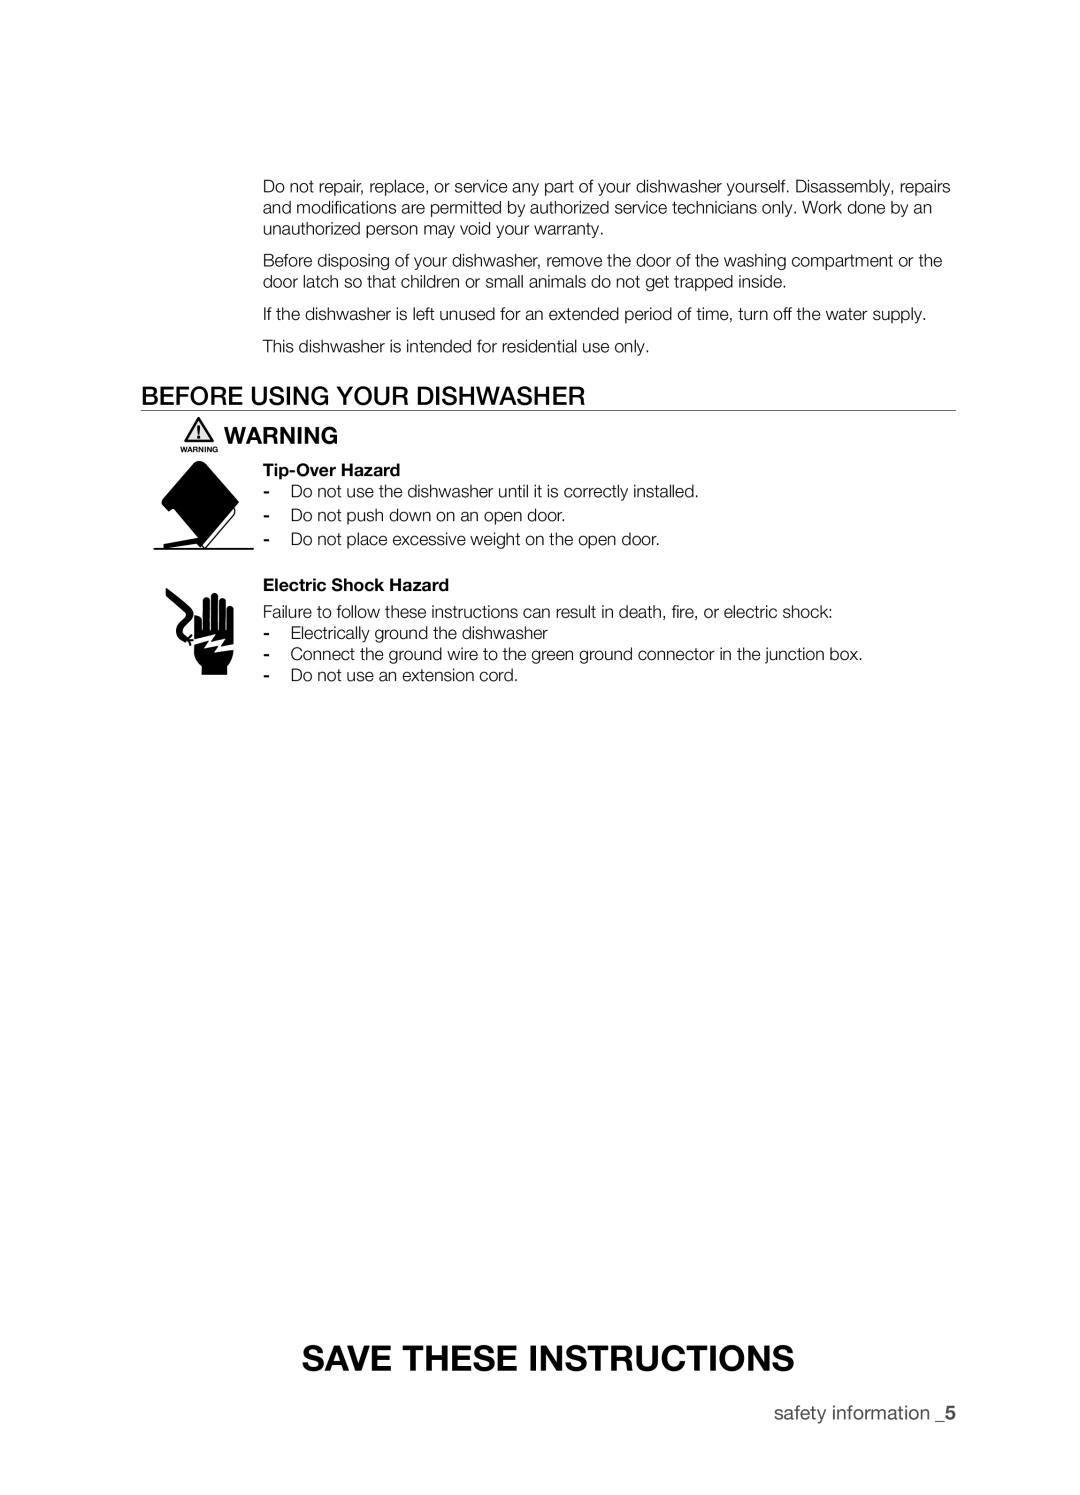 Samsung DMT800 Series manual Before using your dishwasher, Save these instructions, safety information, Tip-Over Hazard 